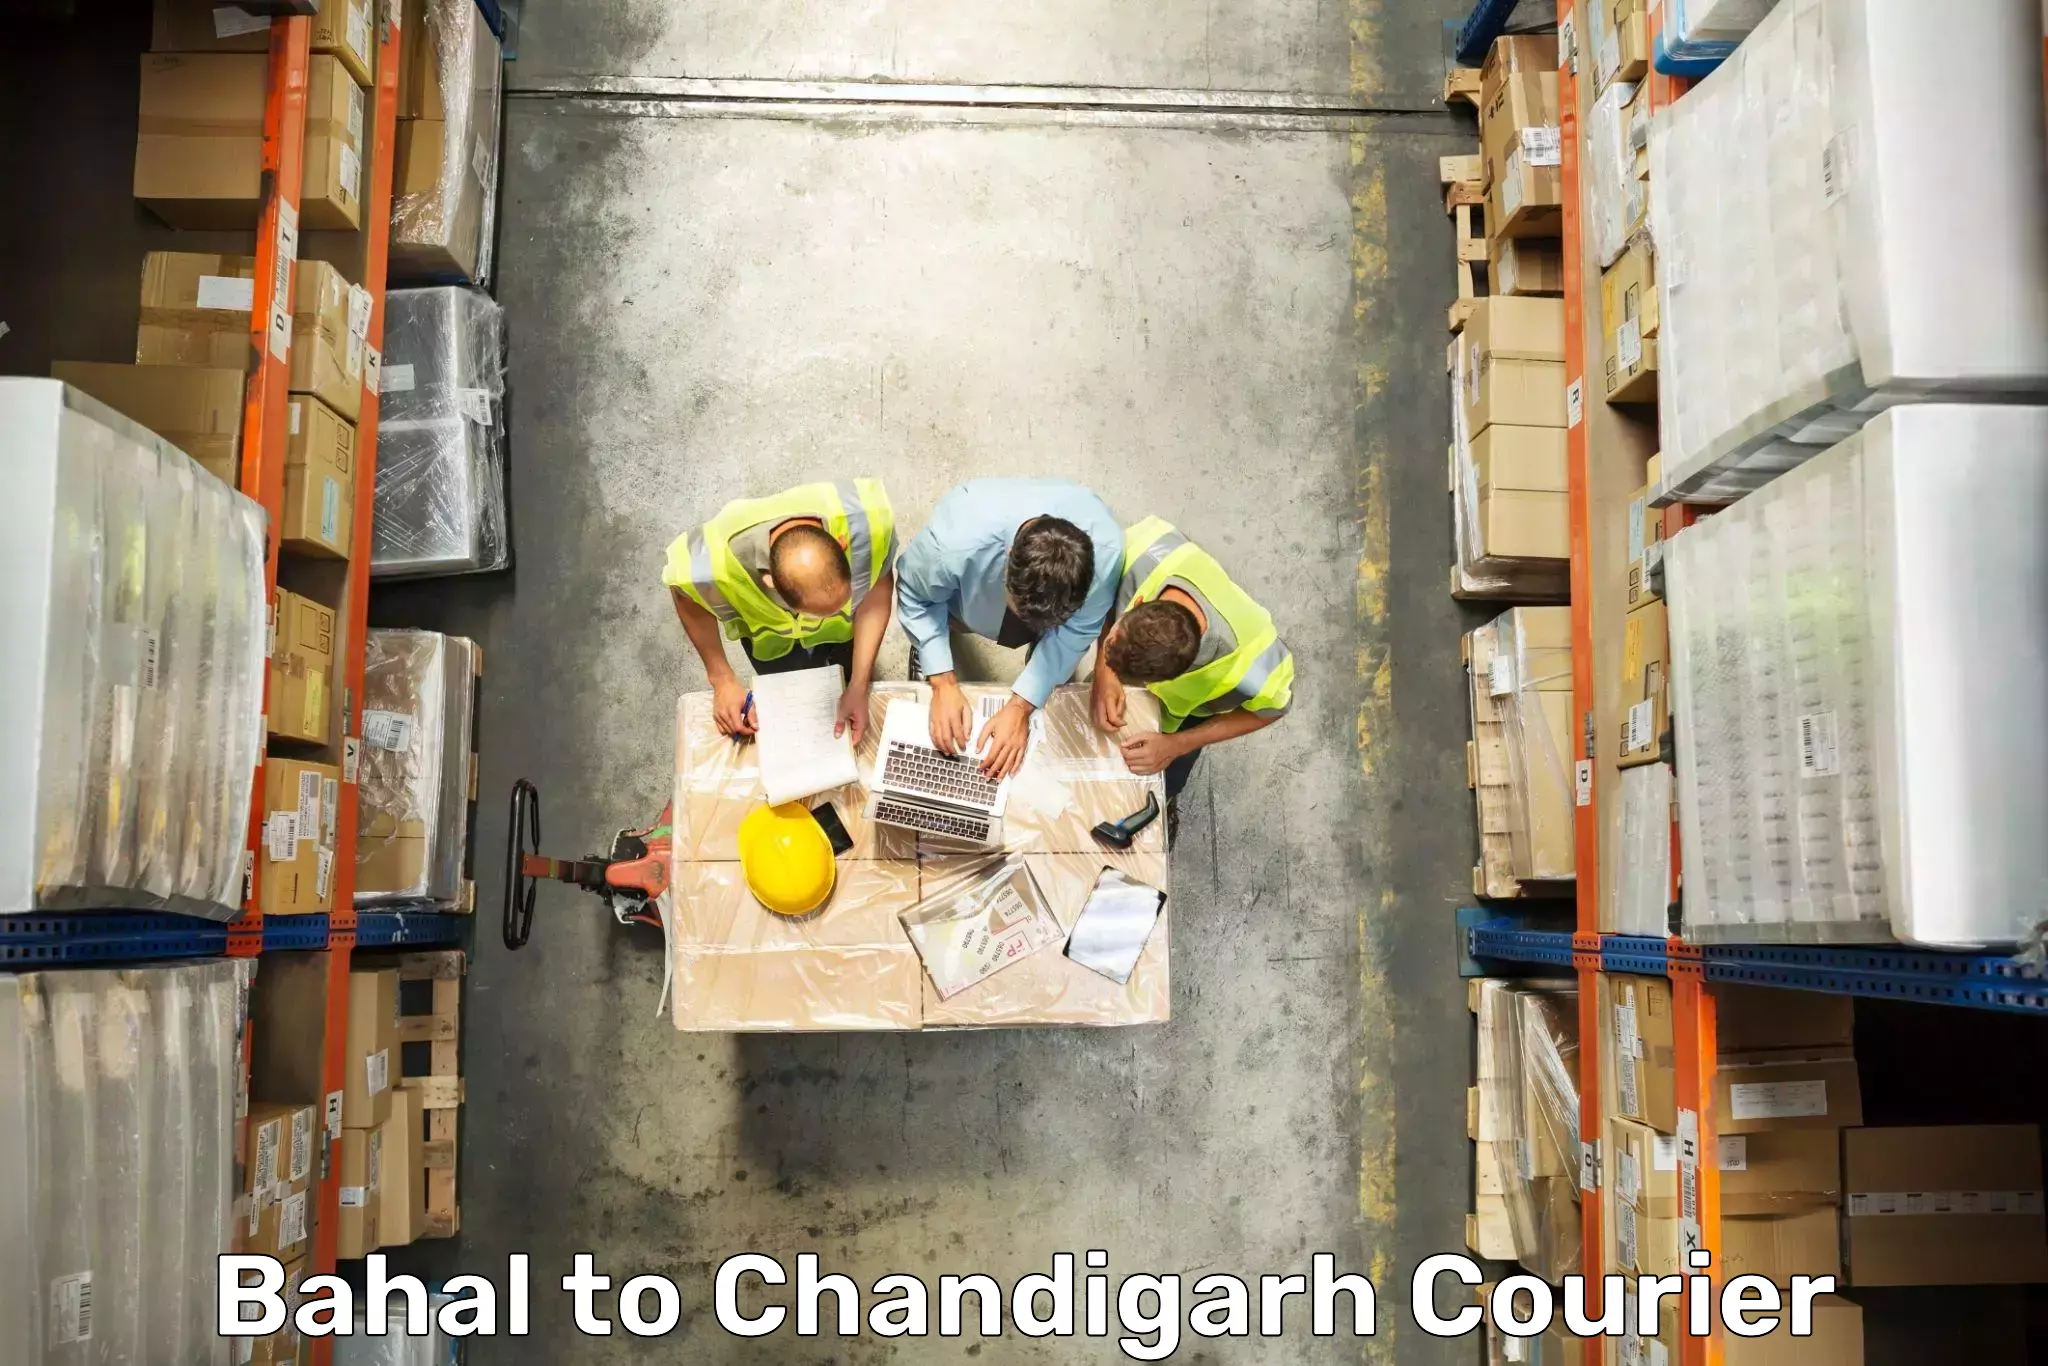 Luggage transport consultancy Bahal to Chandigarh